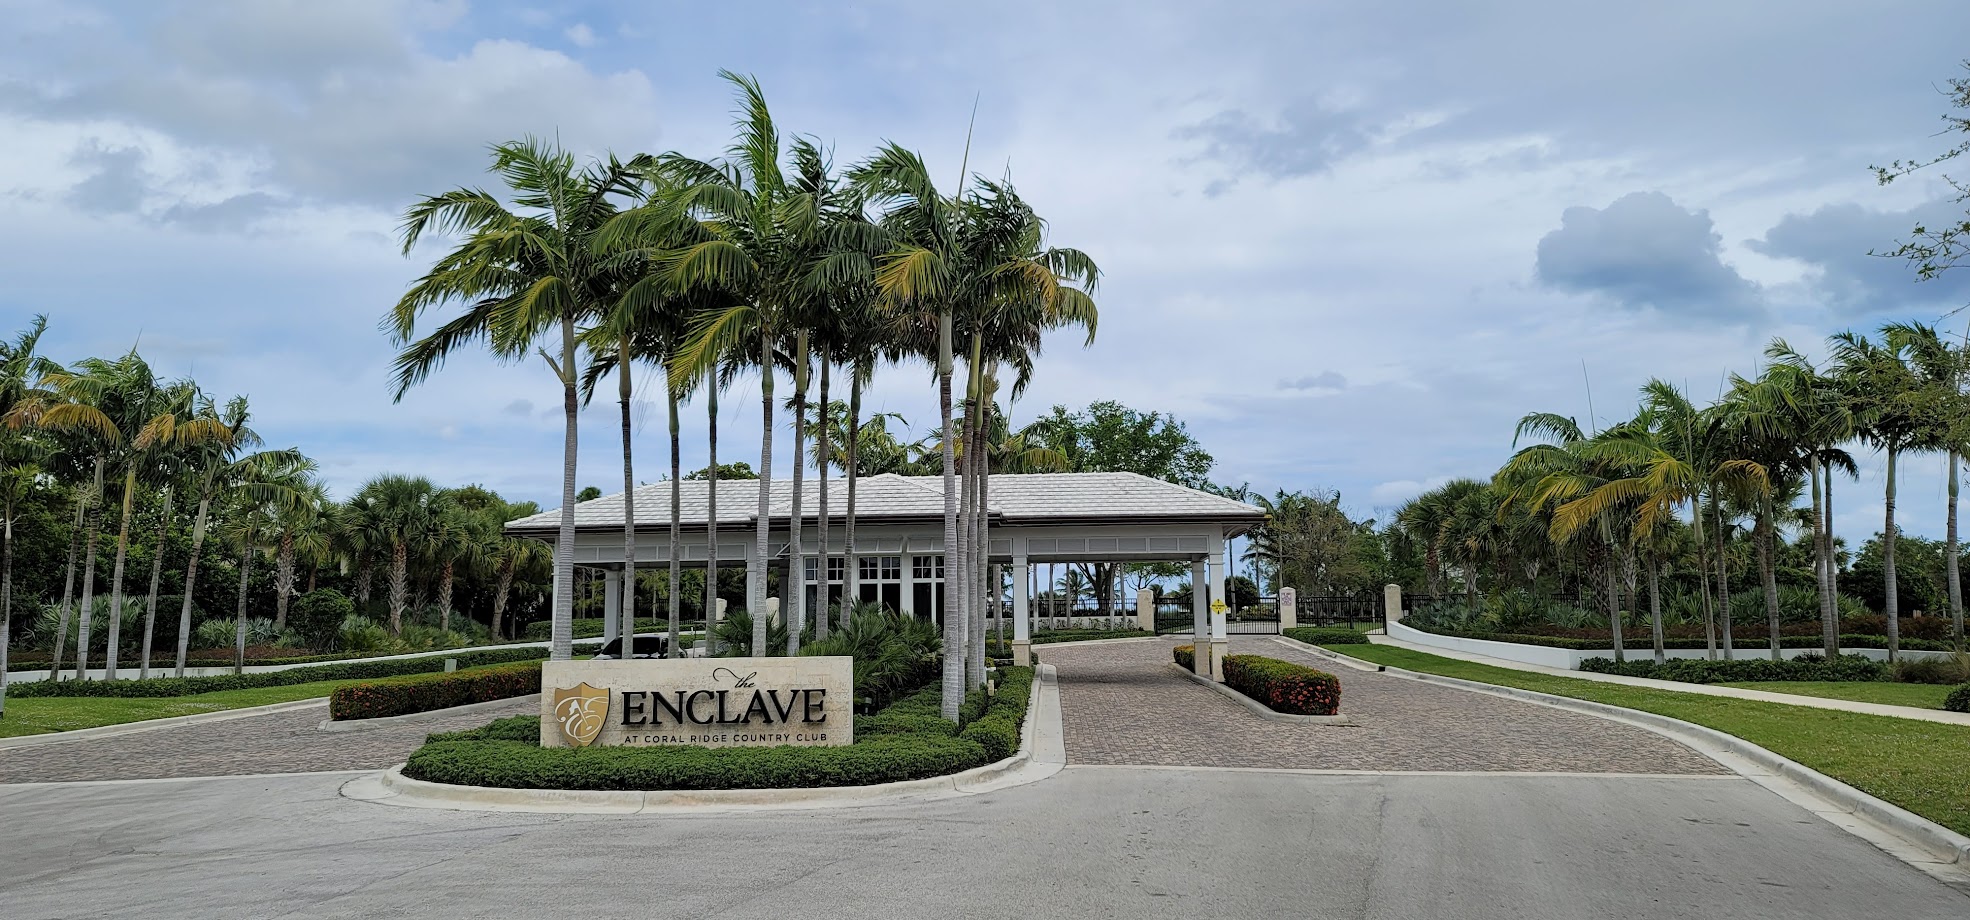 The Enclave at Coral Ridge Country Club